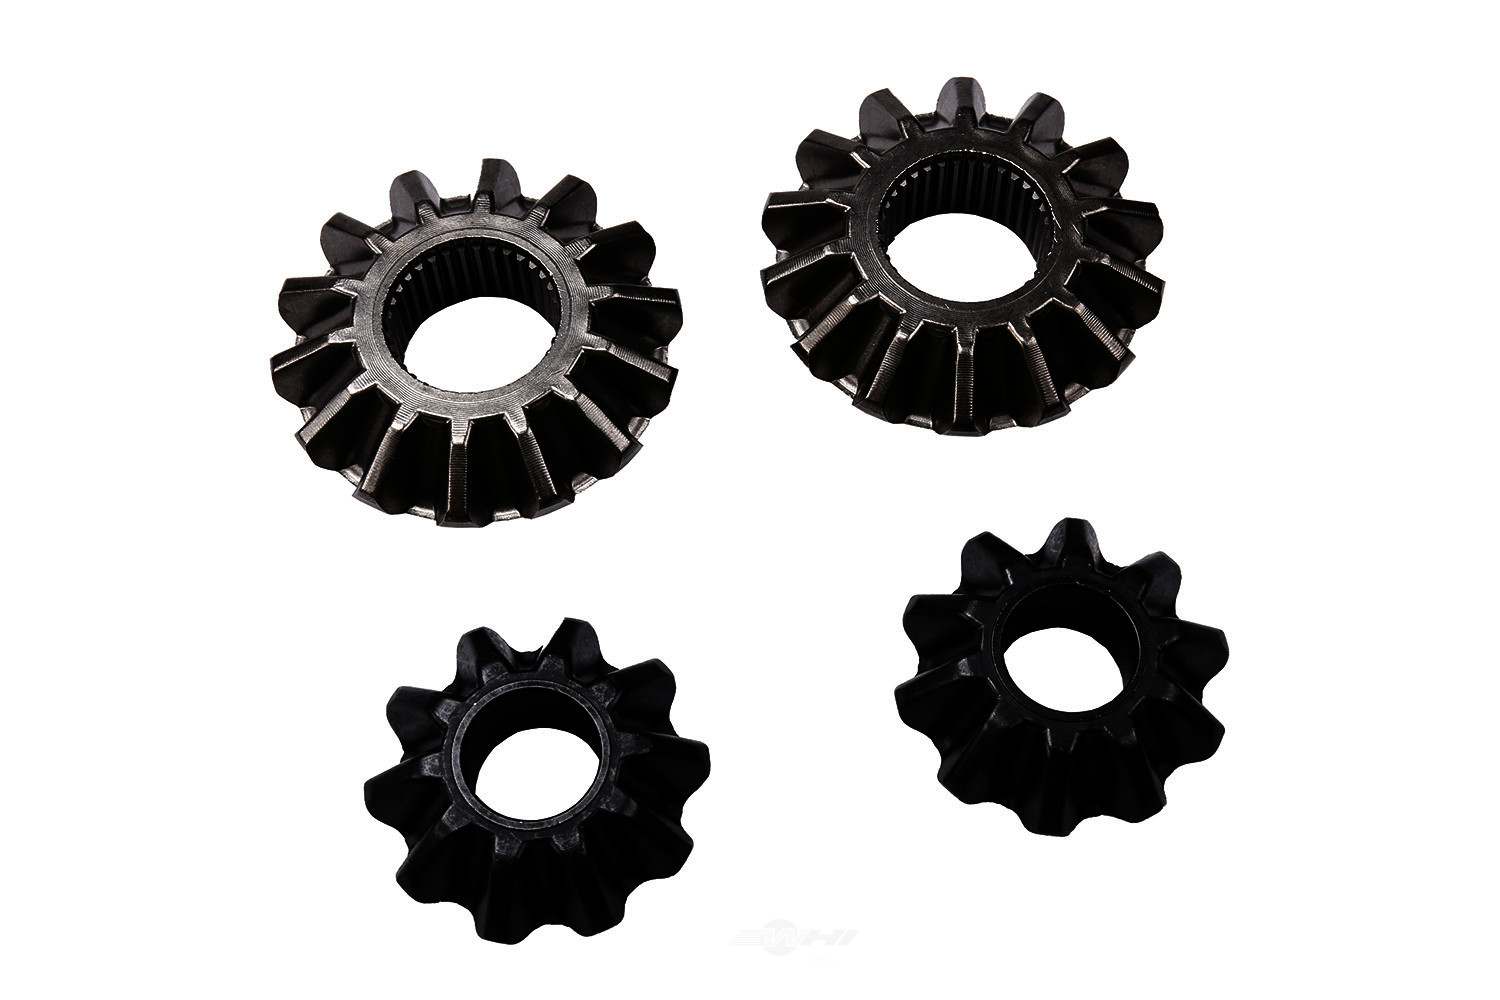 GM GENUINE PARTS - Differential Carrier Gear Kit - GMP 93743633